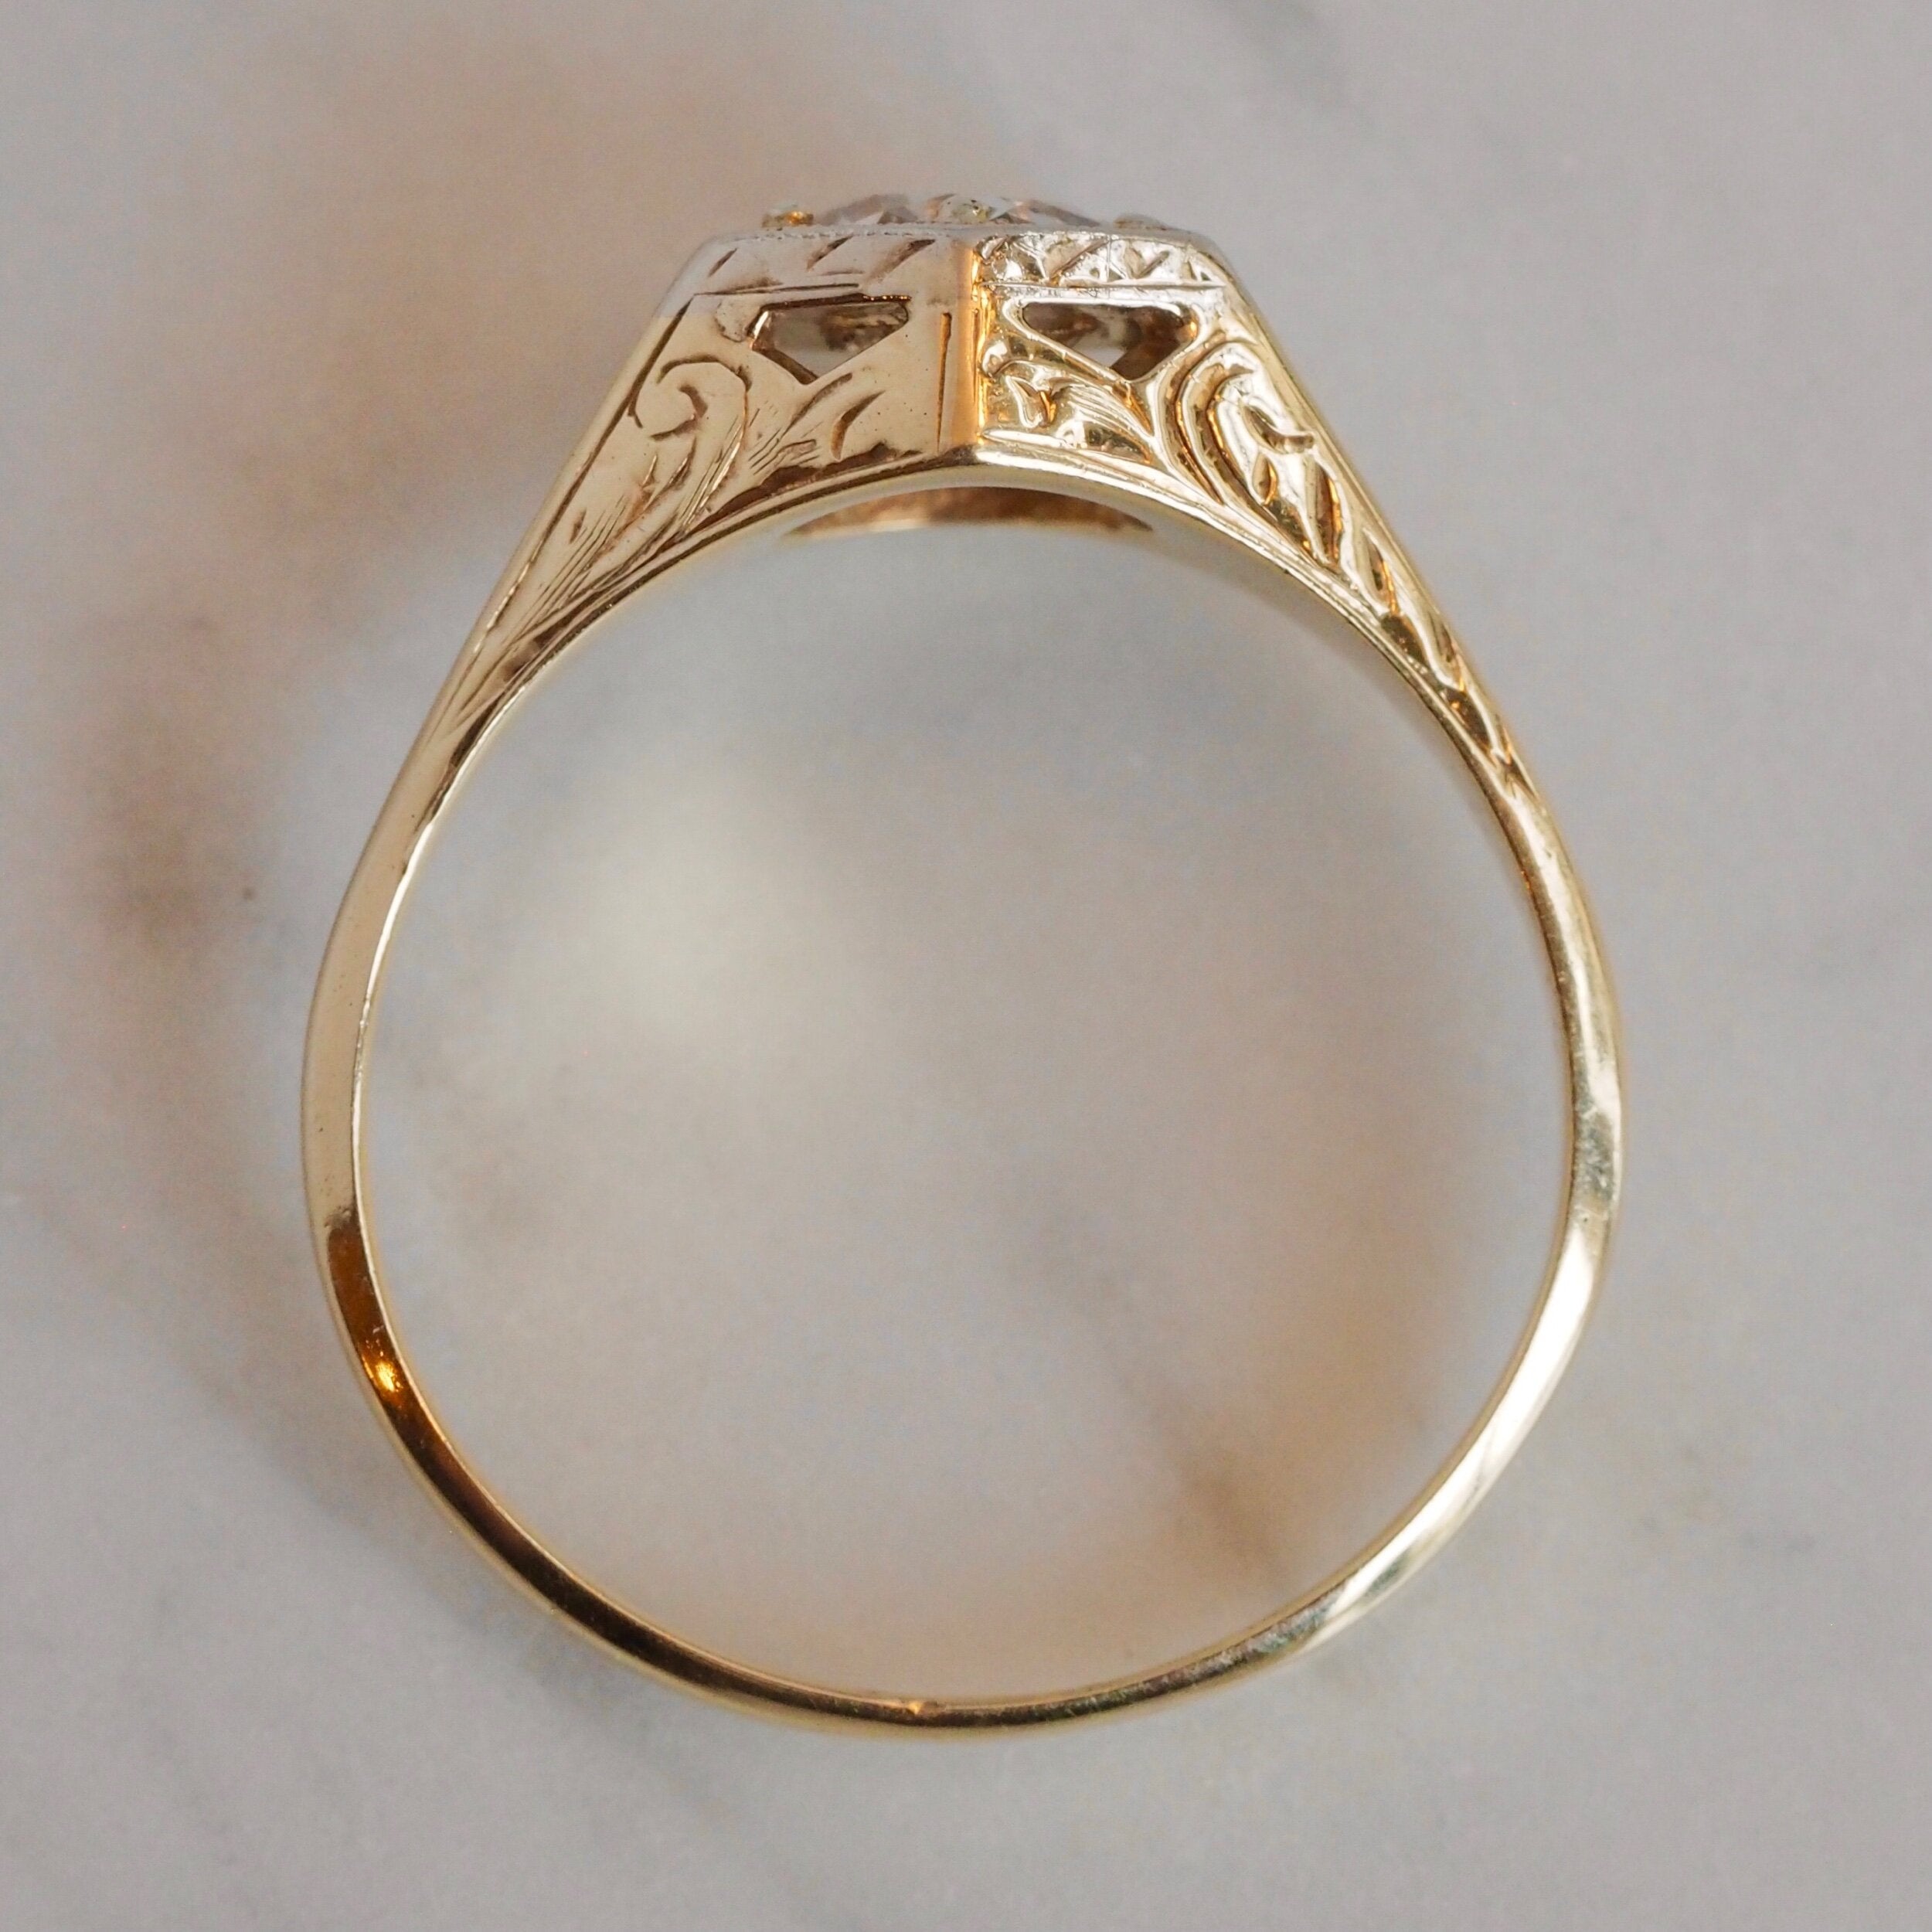 Art Deco 14k White and Yellow Gold Transitional Cut Diamond Ring